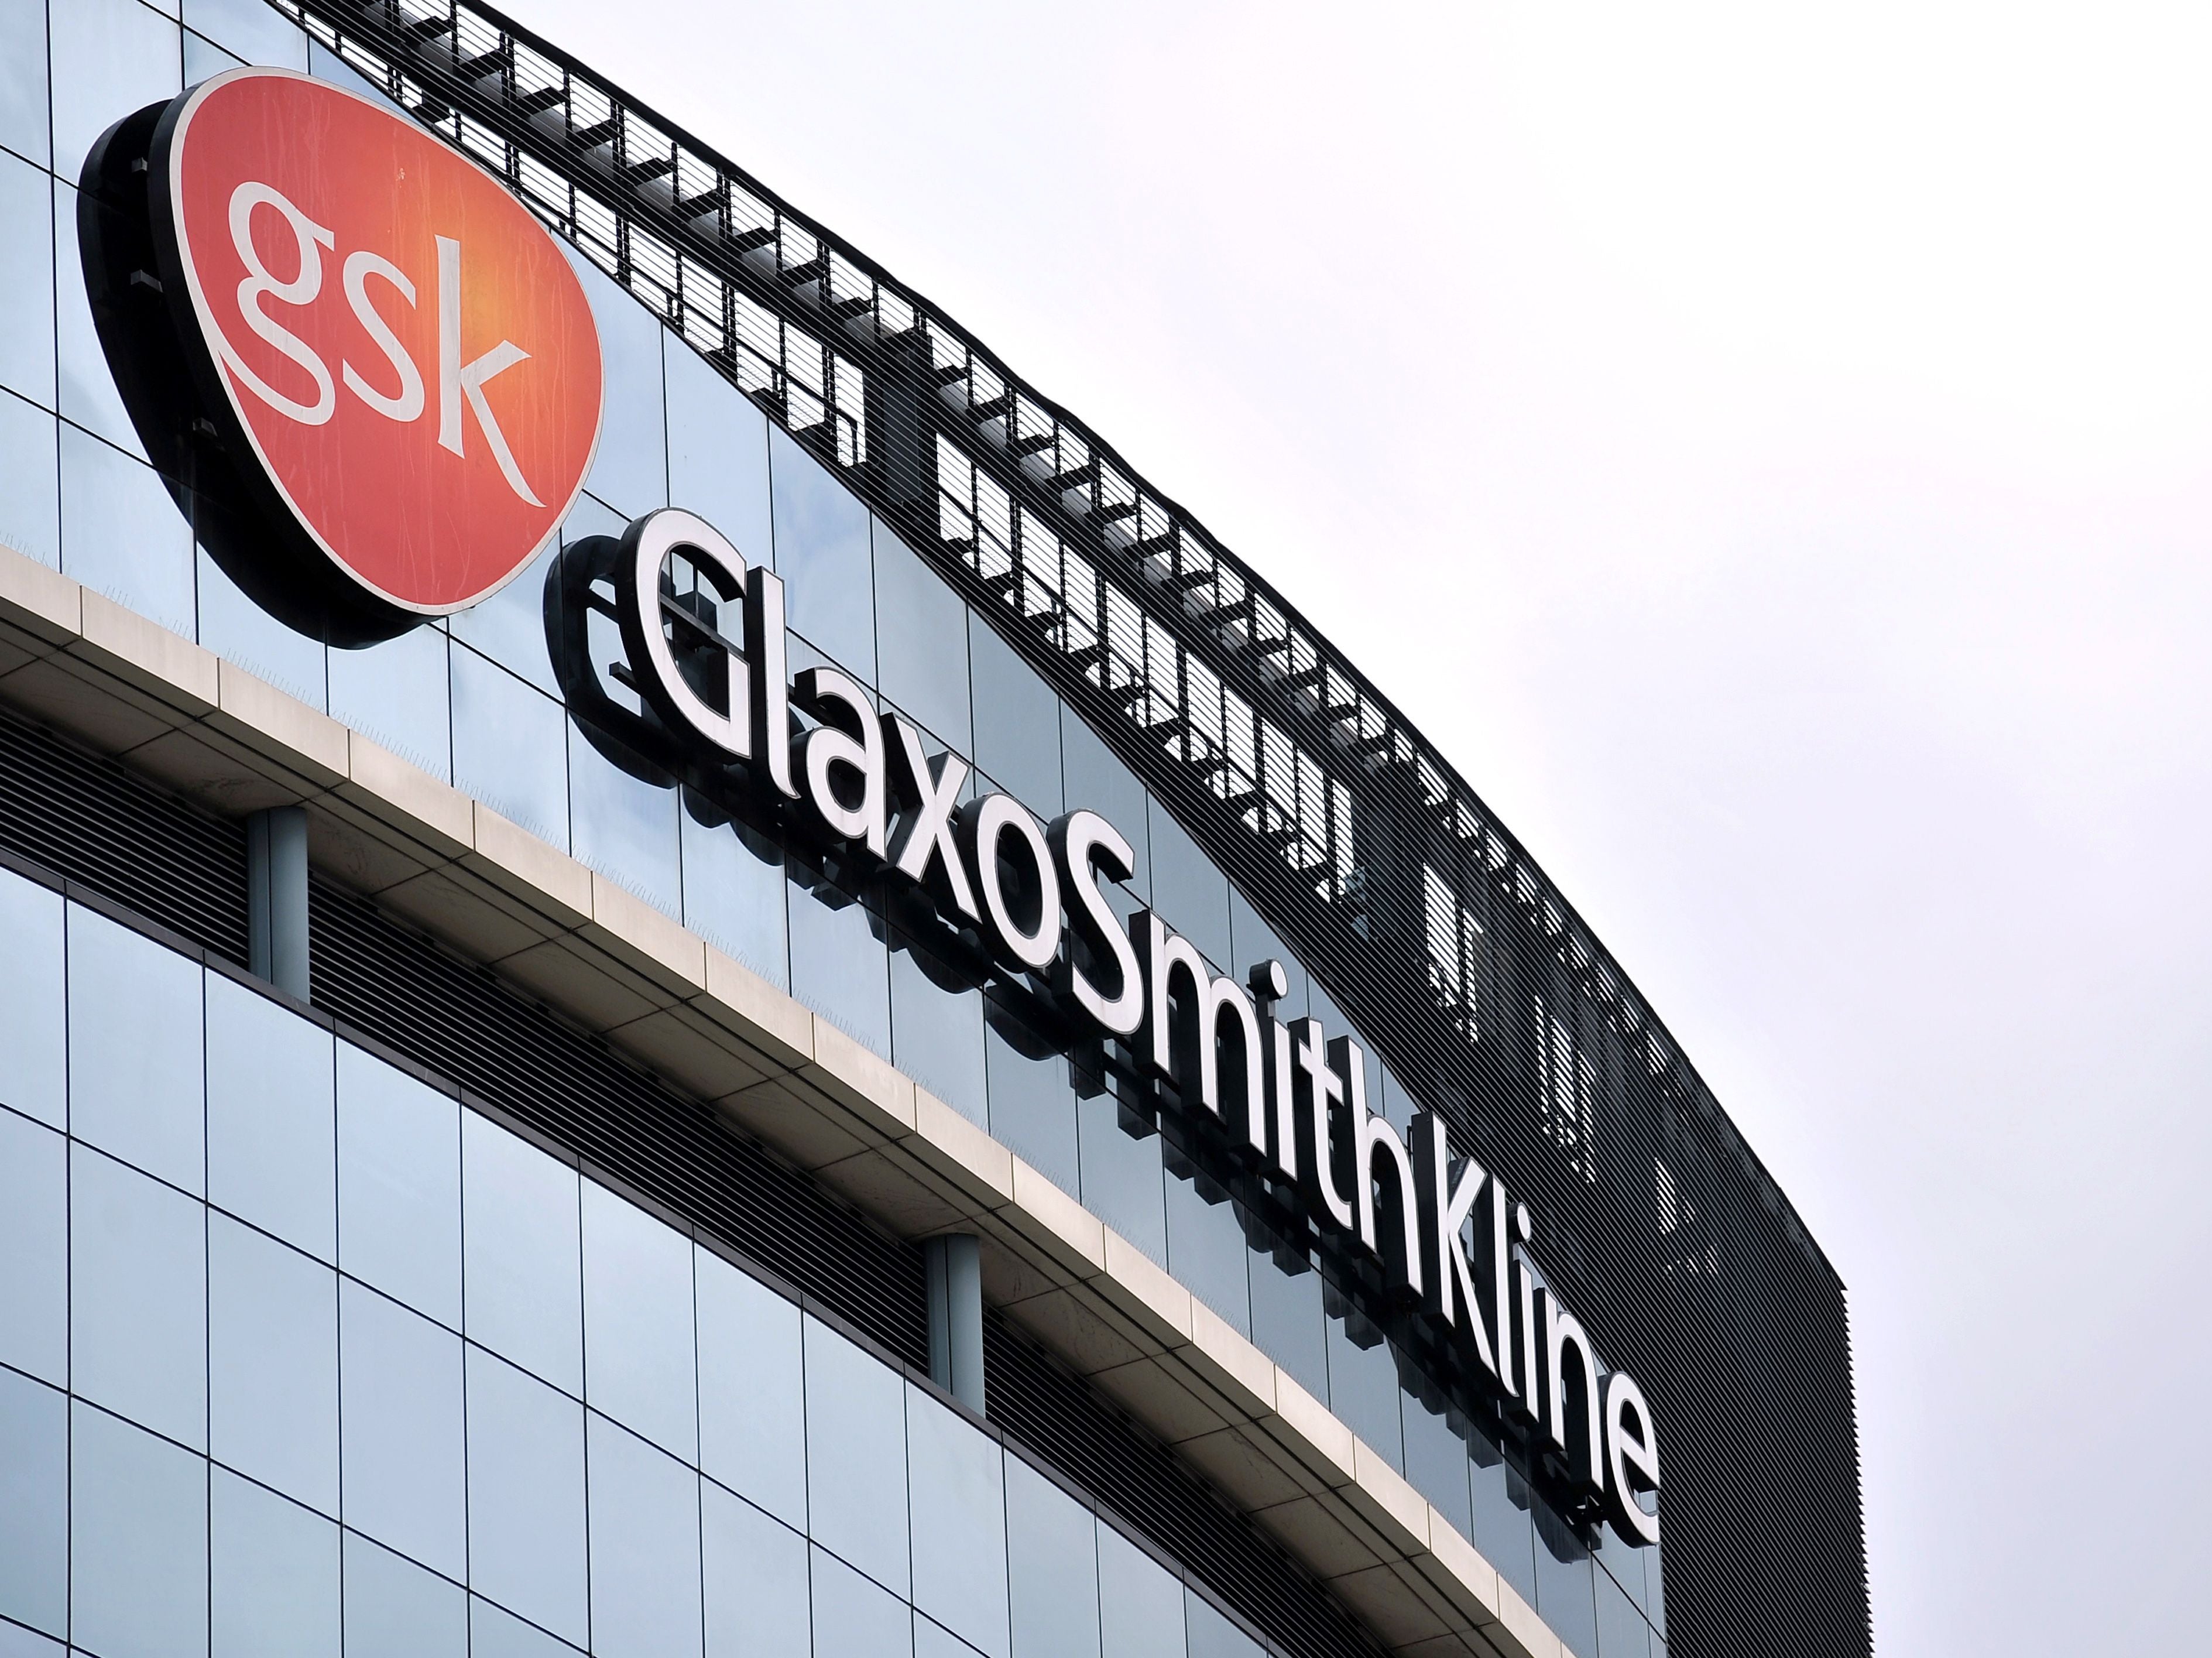 A monoclonal antibody drug reduces hospital admission or death from Covid-19 by 85 per cent, the pharmaceutical giant GlaxoSmithKline (GSK) has announced